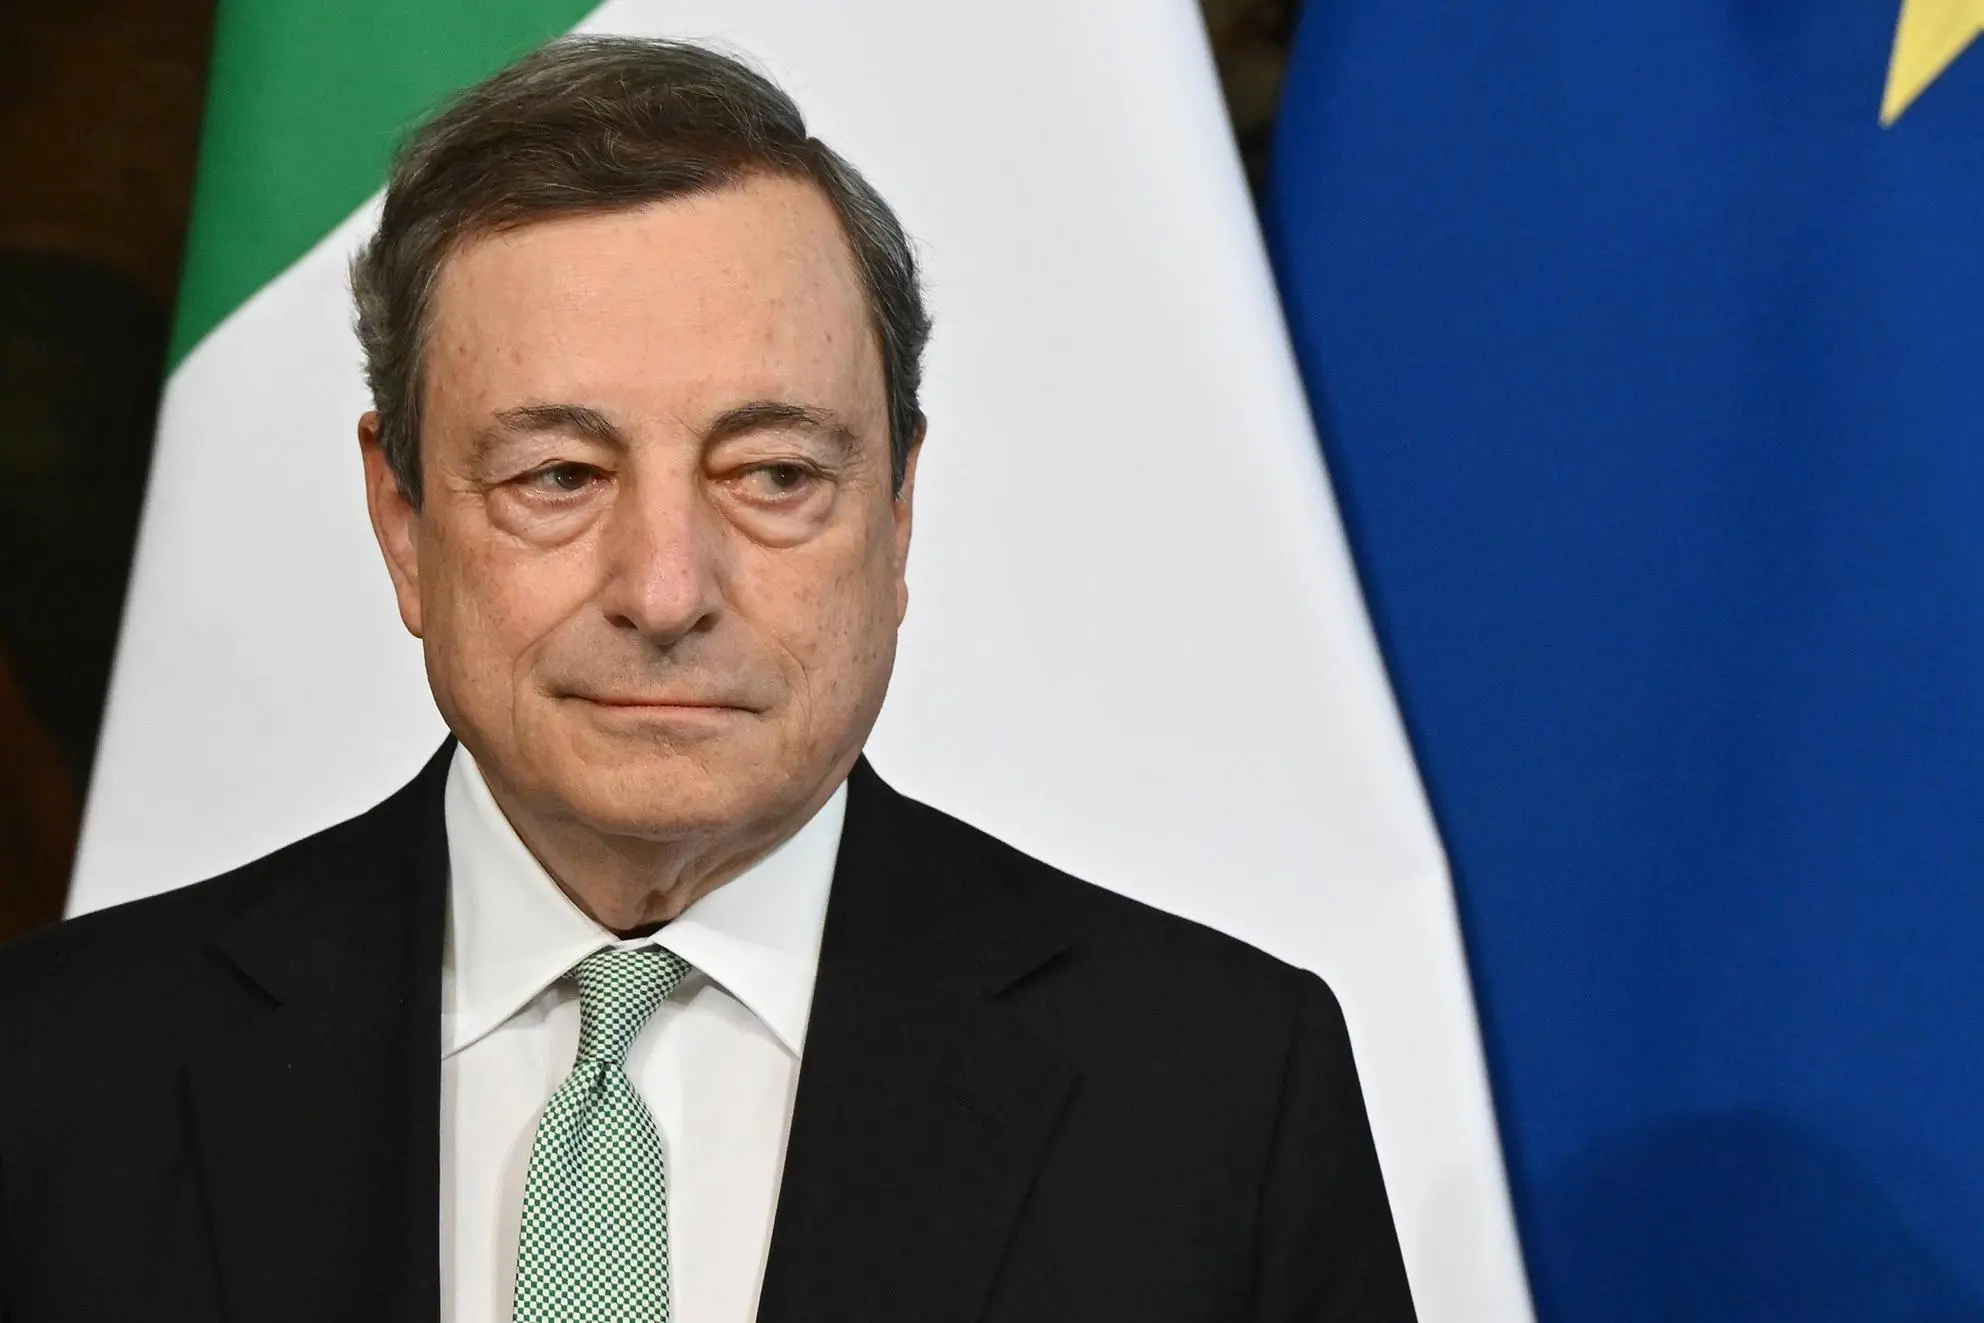 Italian Prime Minister Mario Draghi looks on during signing of a memorandum of understanding after a meeting with Algerian President at Chigi Palace in Rome, Italy, 26 May 2022. ANSA/ETTORE FERRARI